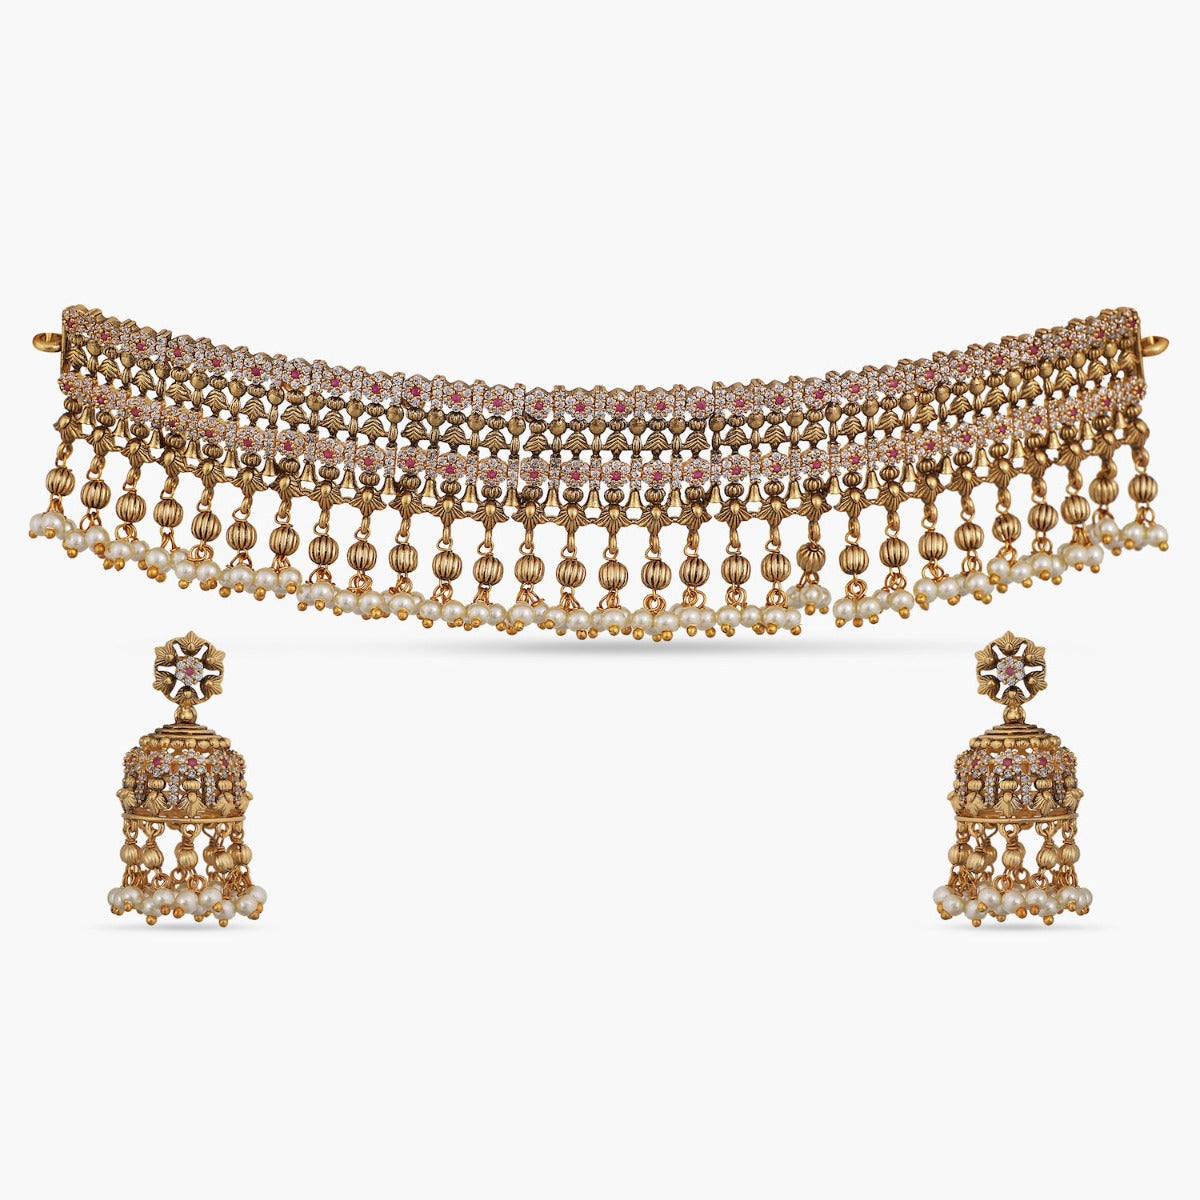 An image of Pearl choker necklace and stud earrings set on brown fabric